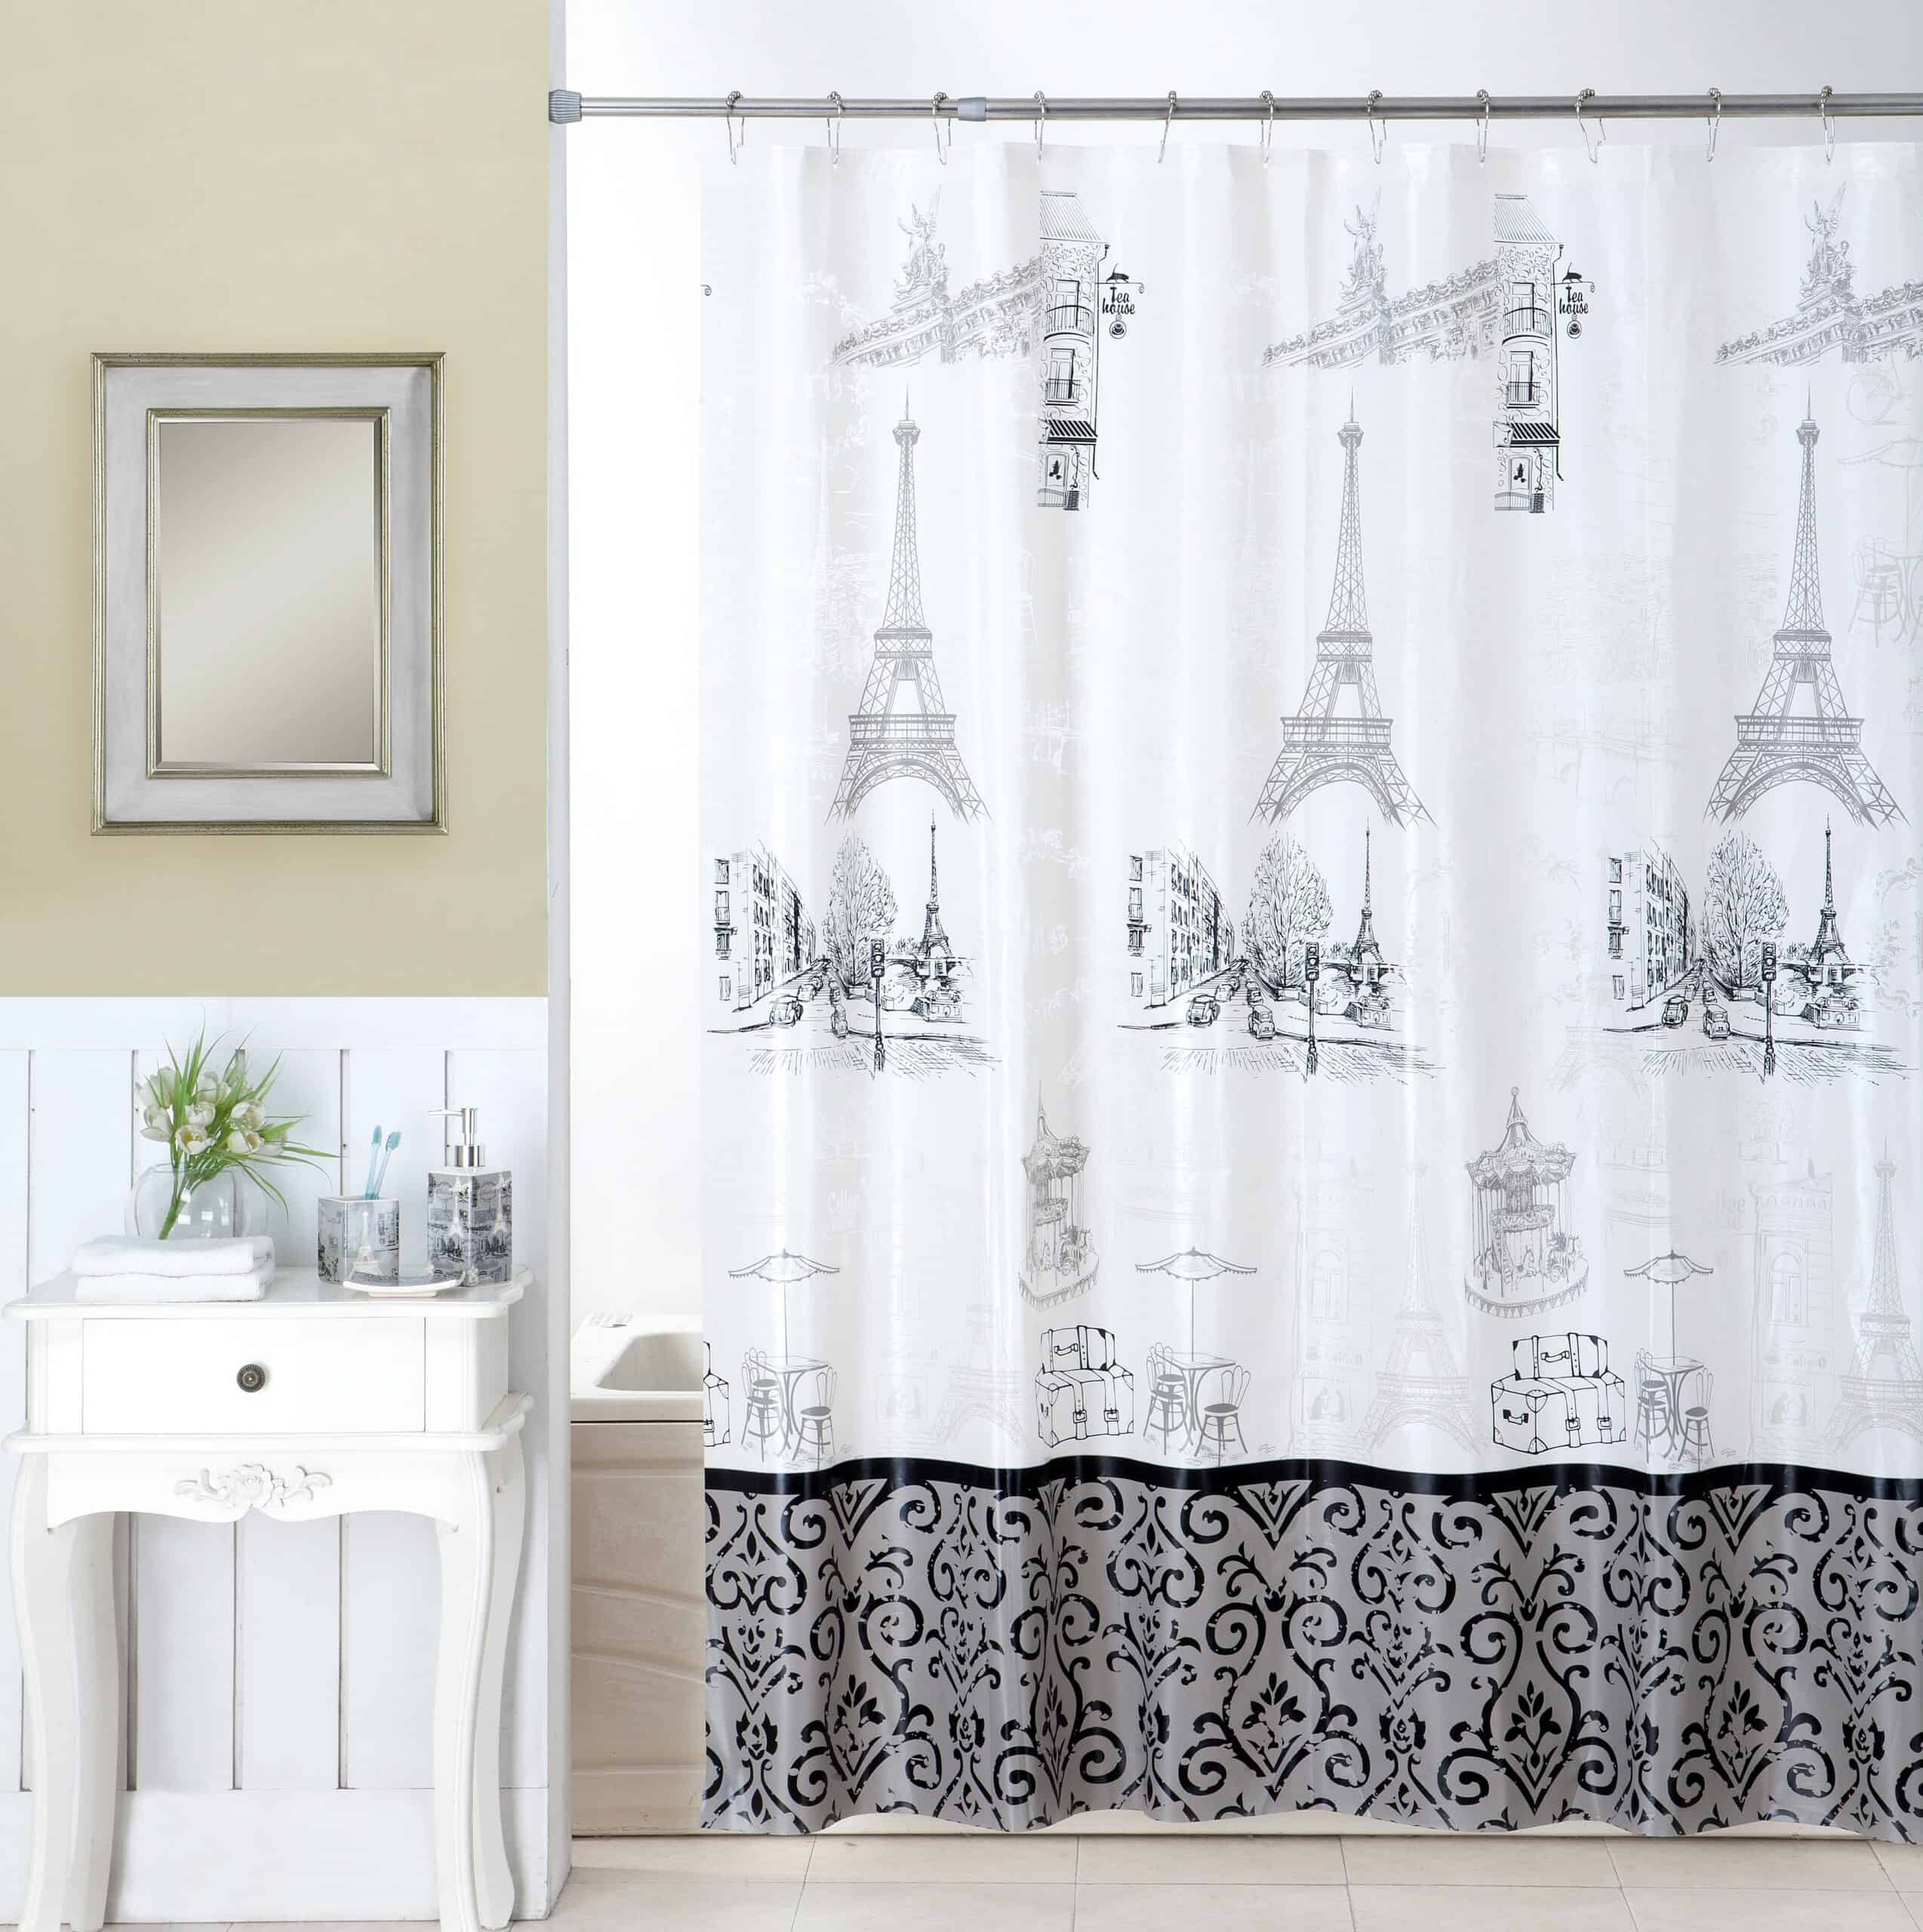 how to decorate shower doors with curtains - shower curtain